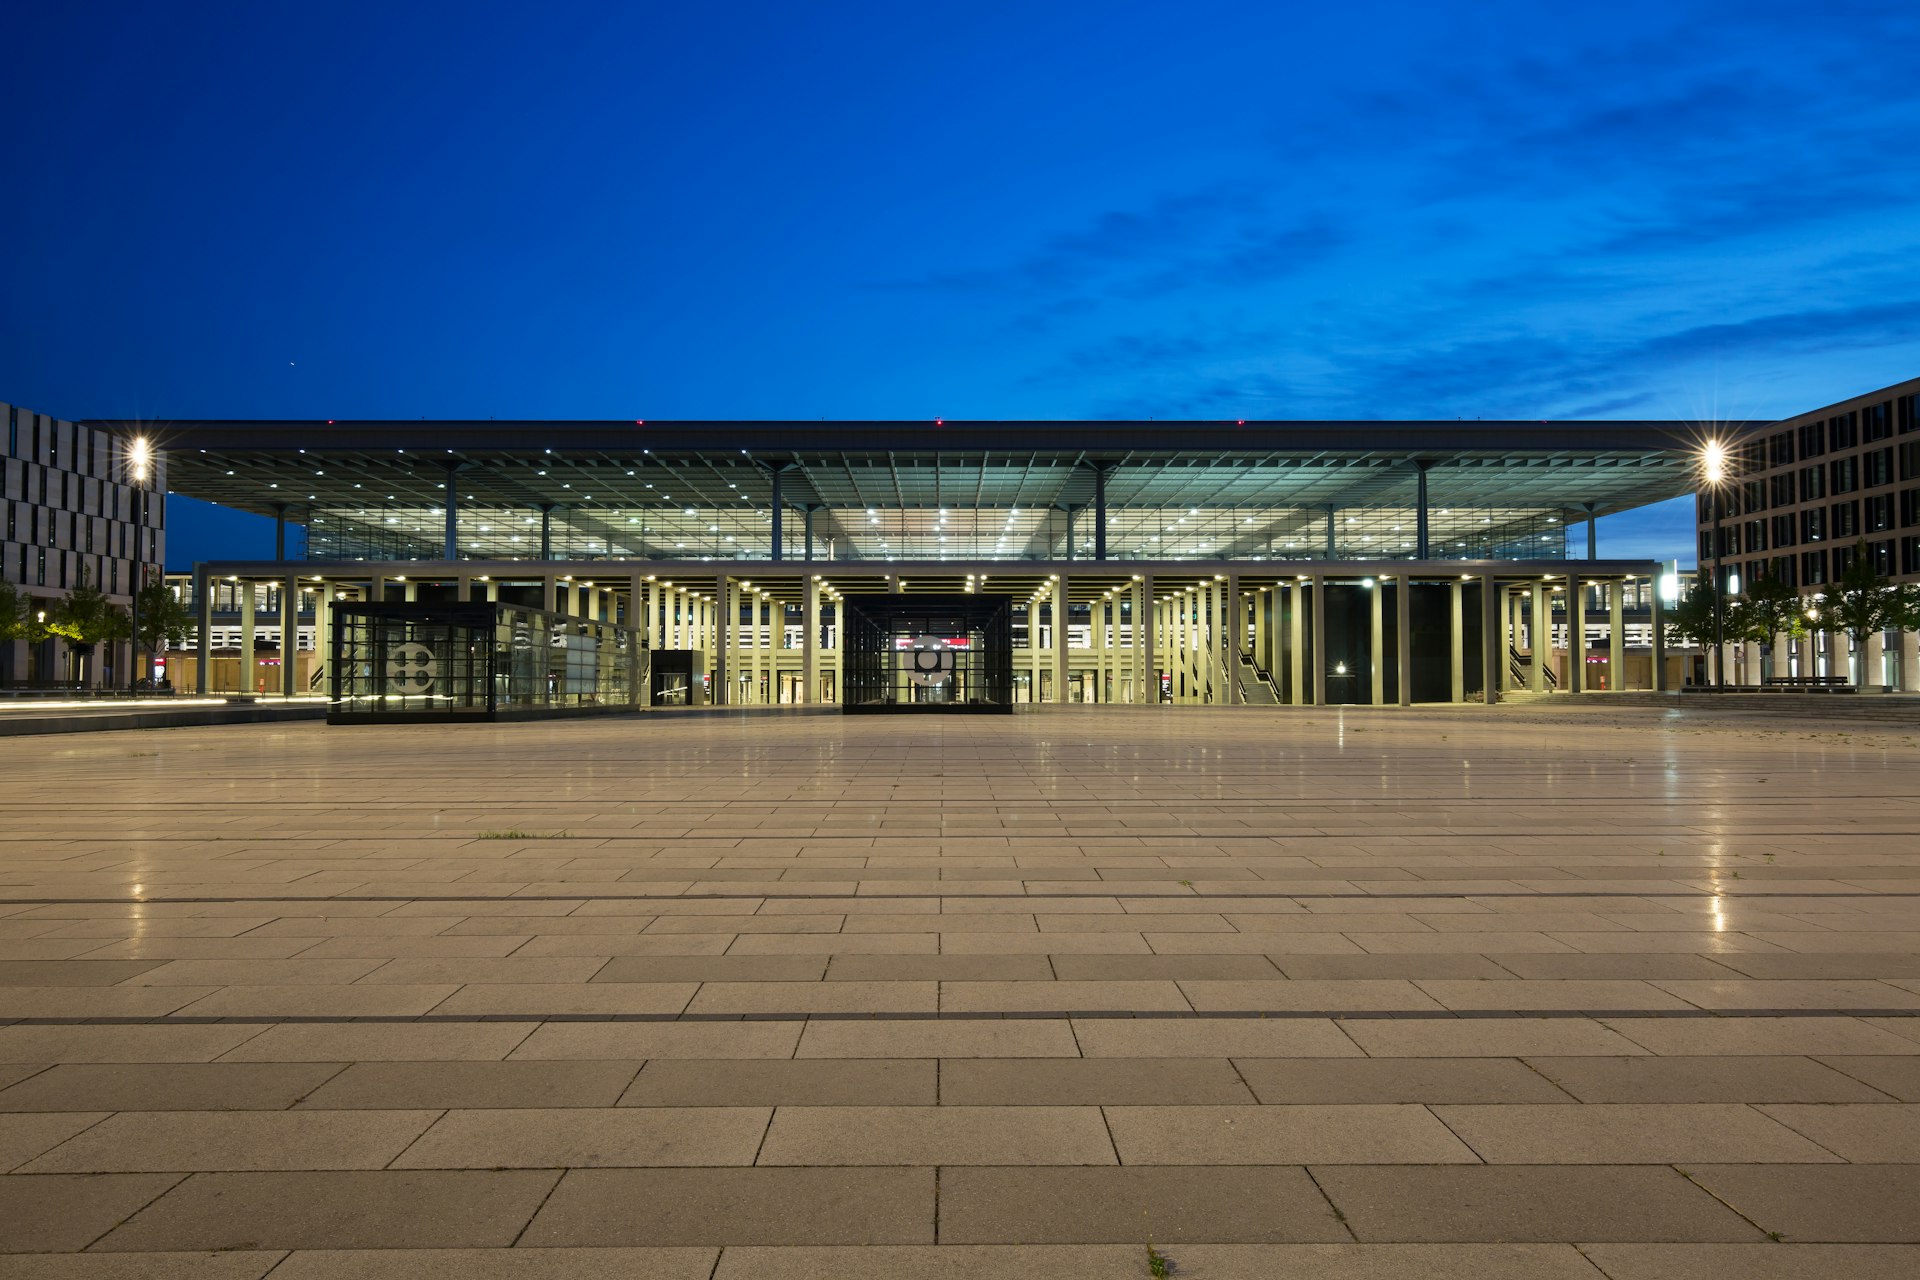 he terminal of Berlin Brandenburg Airport 'Willy Brandt'. It is the international commercial airport, located on the southern outskirts of Berlin in Schönefeld.